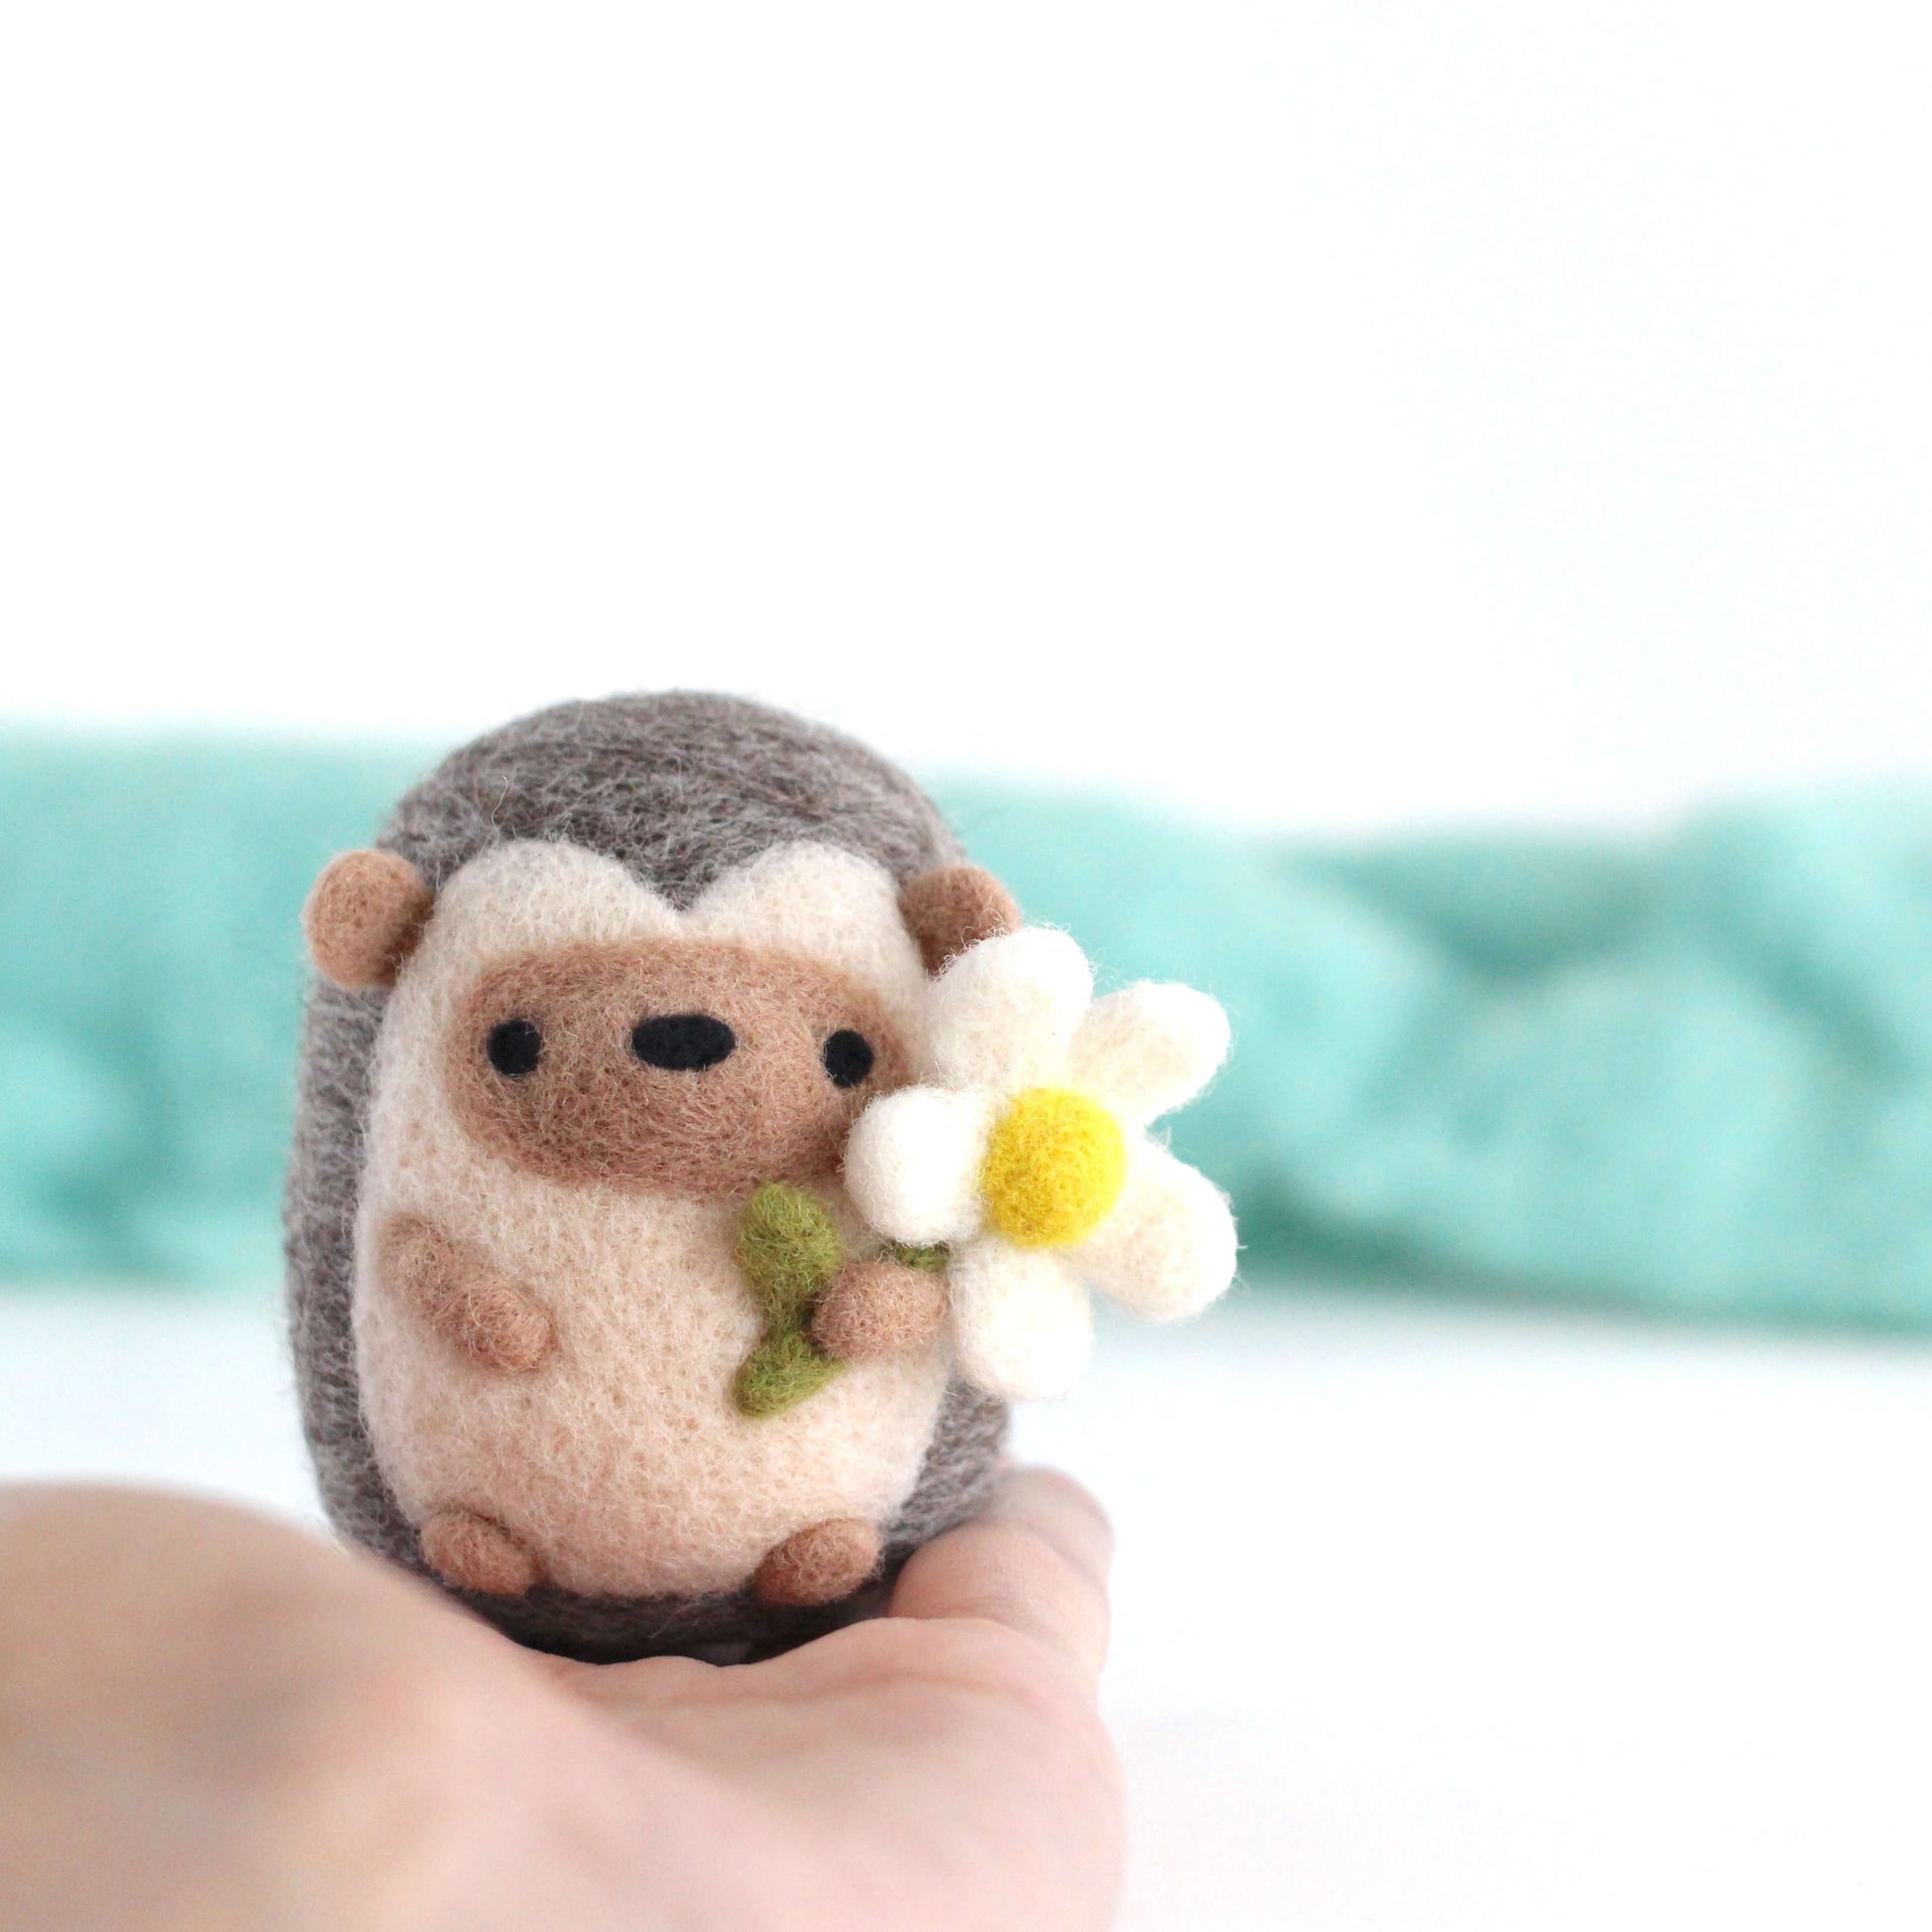 Needle Felted Hedgehog with Daisy by Wild Whimsy Woolies